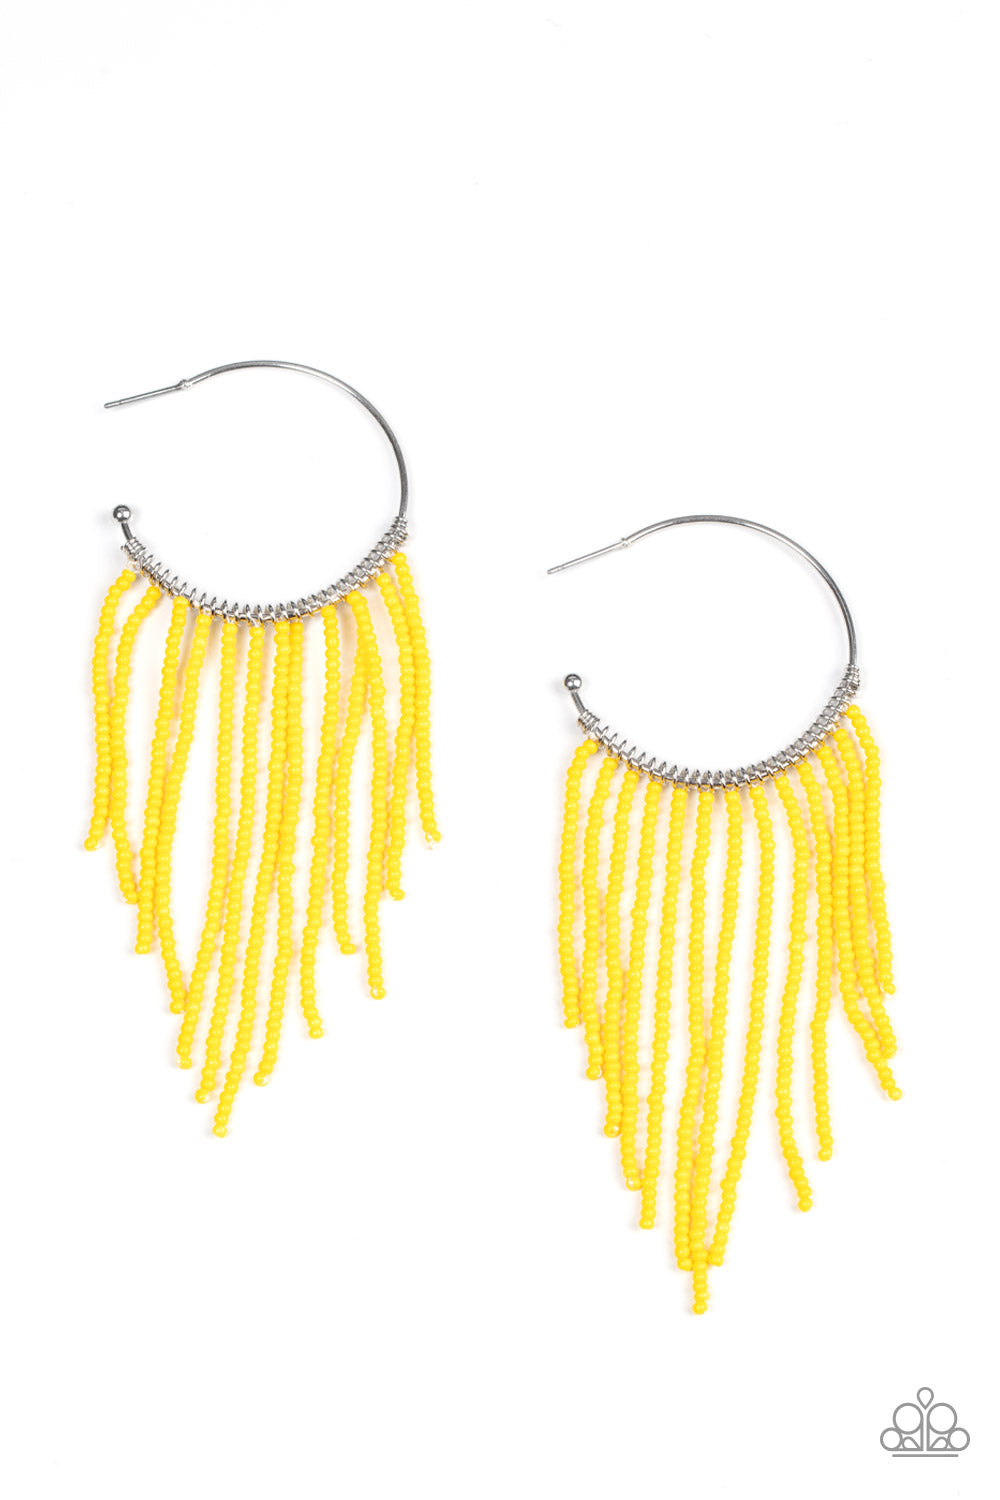 Saguaro Breeze Yellow Seed Bead Hoop Earring - Paparazzi Accessories  Strands of dainty Illuminating seed beads stream out from the bottom of a classic silver hoop, resulting in a flirtatiously tasseled look. Earring attaches to a standard post fitting. Hoop measures approximately 1 1/2" in diameter.  Sold as one pair of hoop earrings.